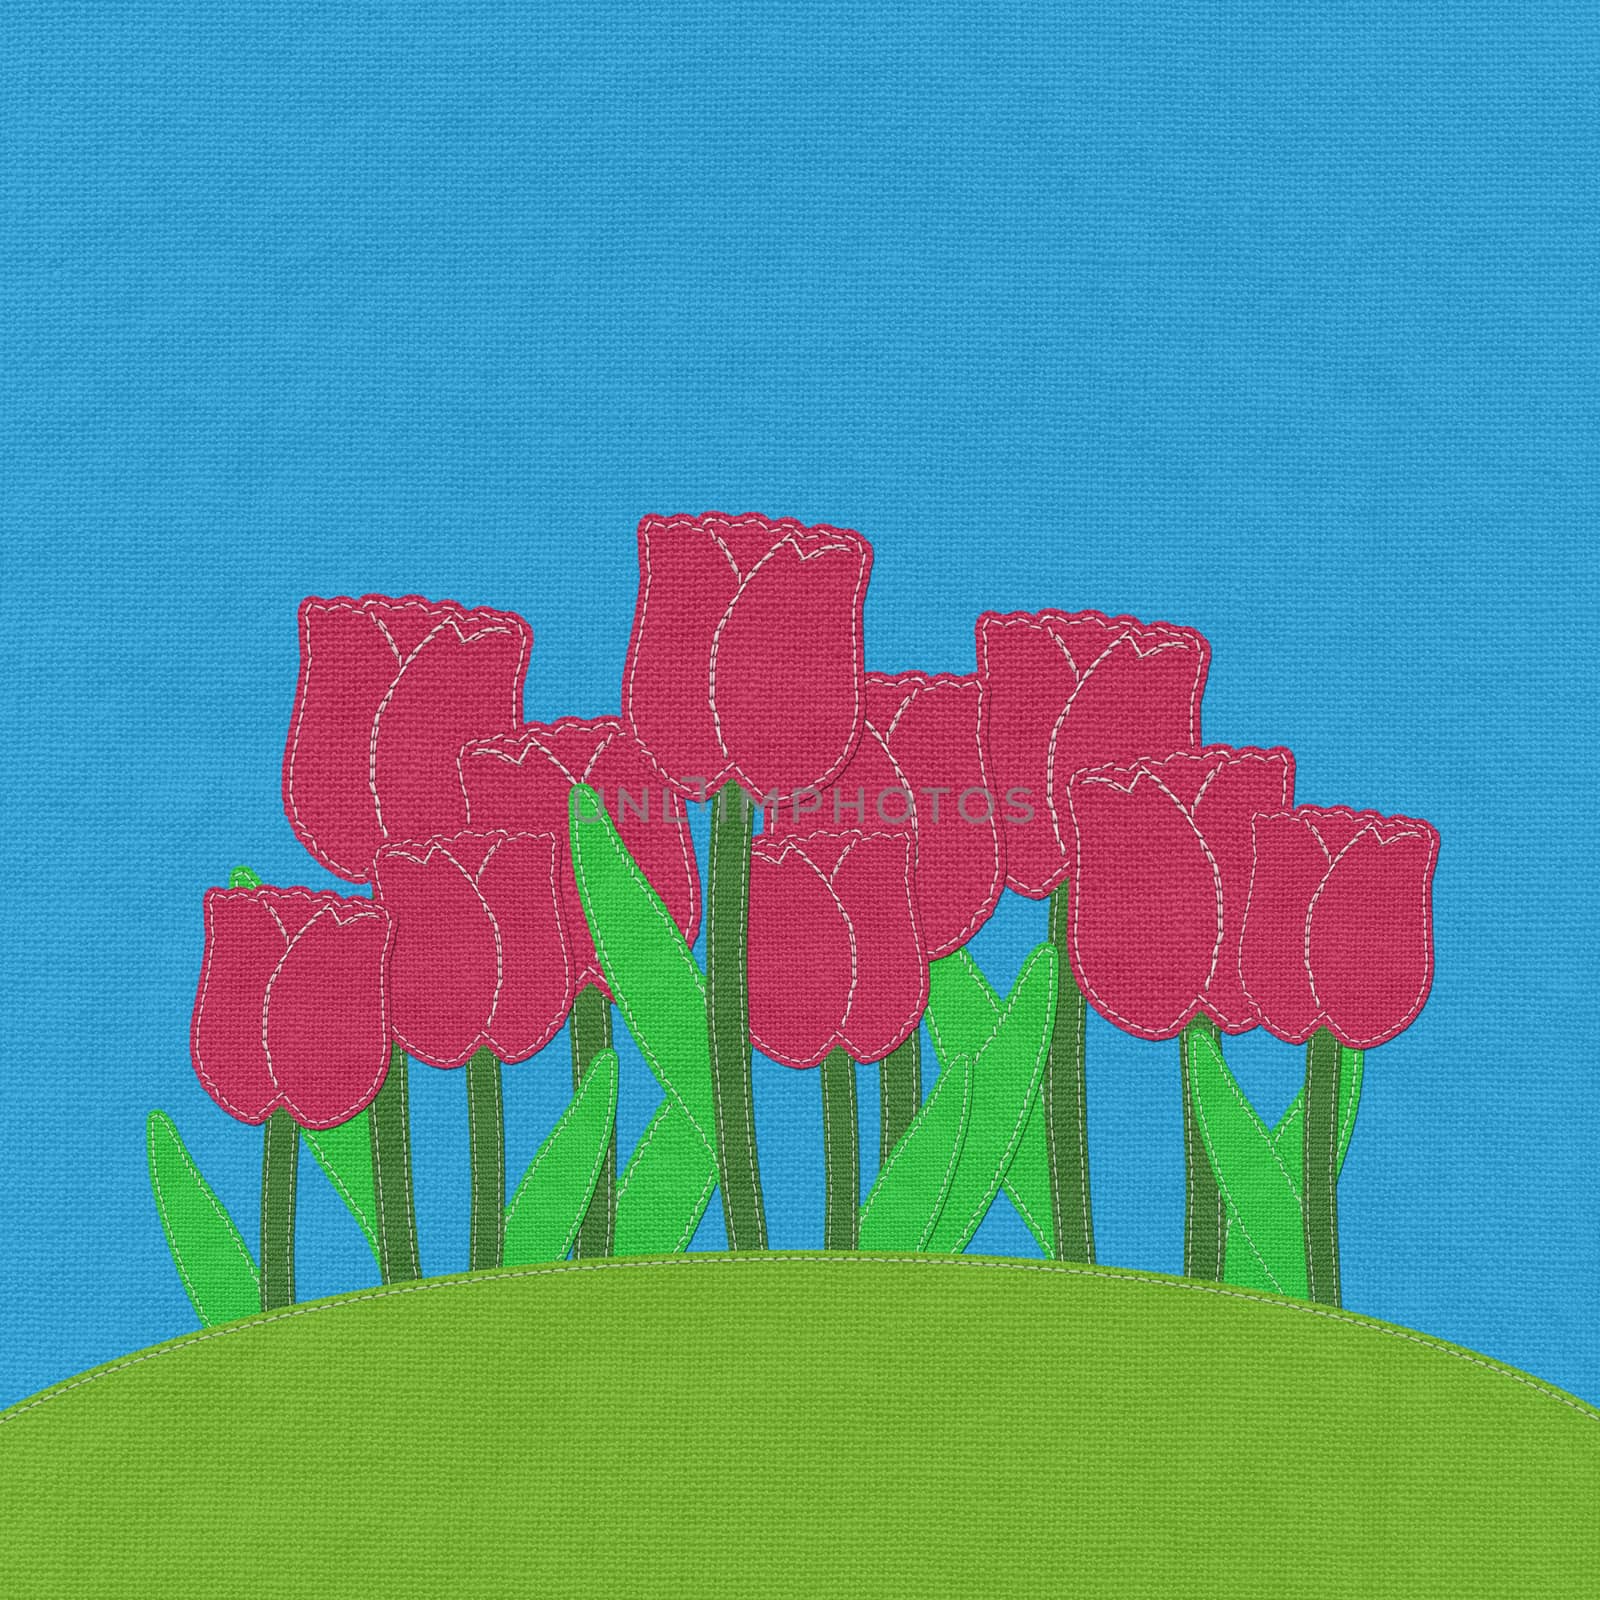 Tulip on green grass field with stitch style fabric background by basketman23